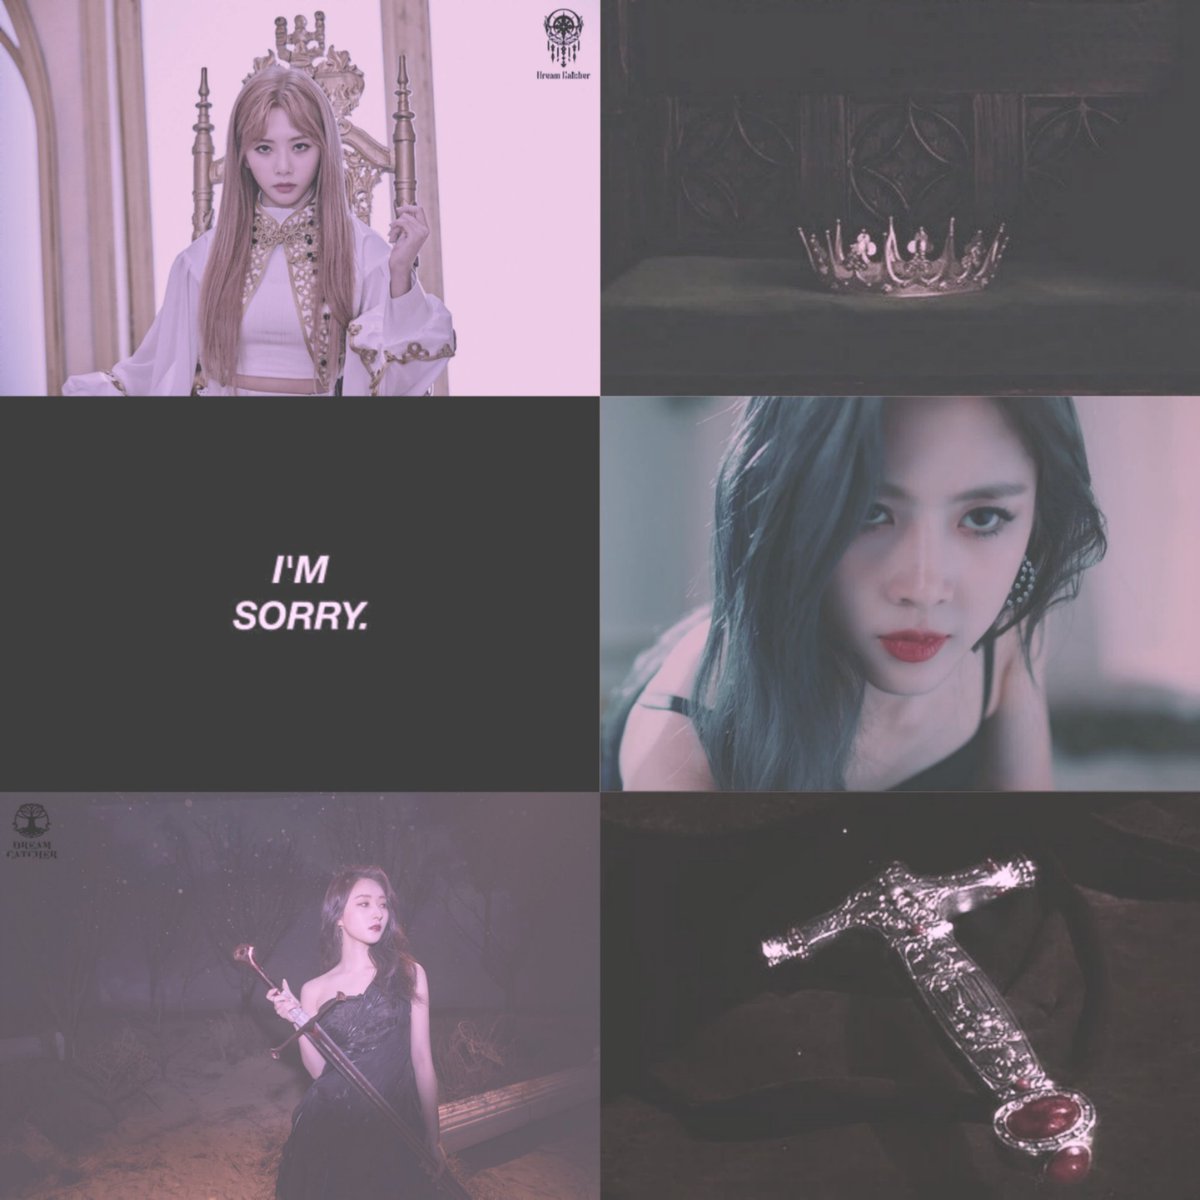 "through belated regrets"yoohyeon is an assassin, infiltrating the palast to kill queen minji. only royal guard bora is suspicious of her. when yoohyeon finds out that minji and bora are dating, she decides to pretend she's in love with them to get closer to the queen...